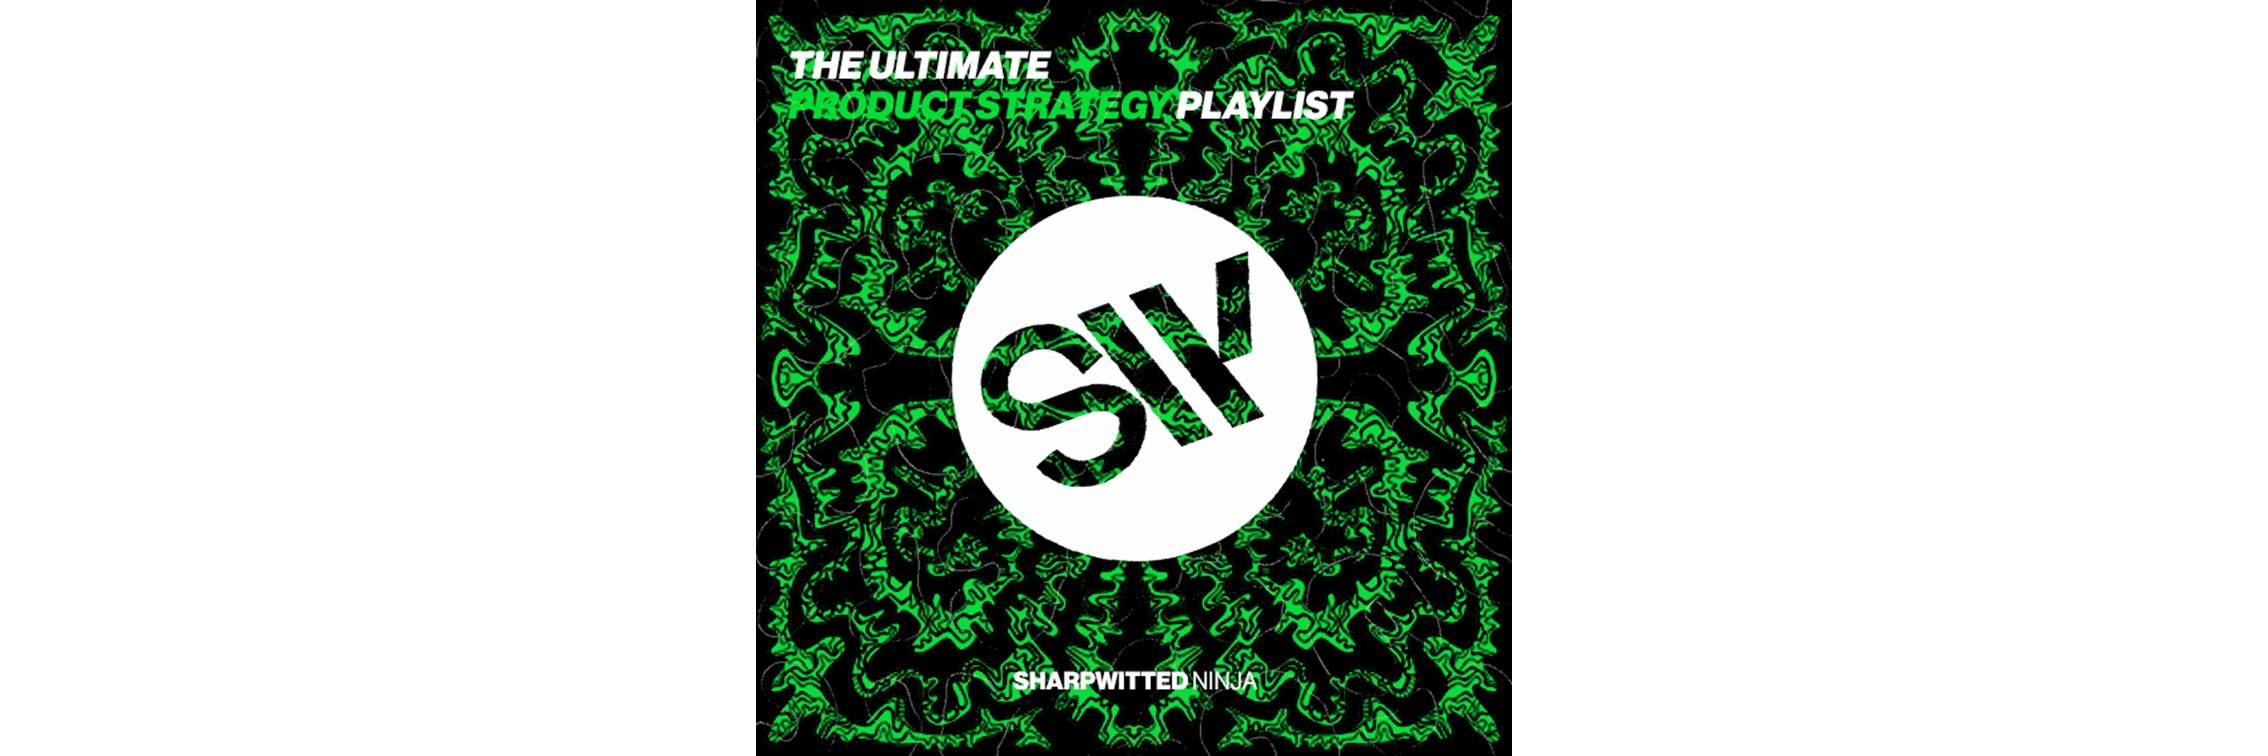 Sharpwitted Present: The Ultimate Product Strategy Playlist. A list of songs that embody the essence of a great Product Strategy.